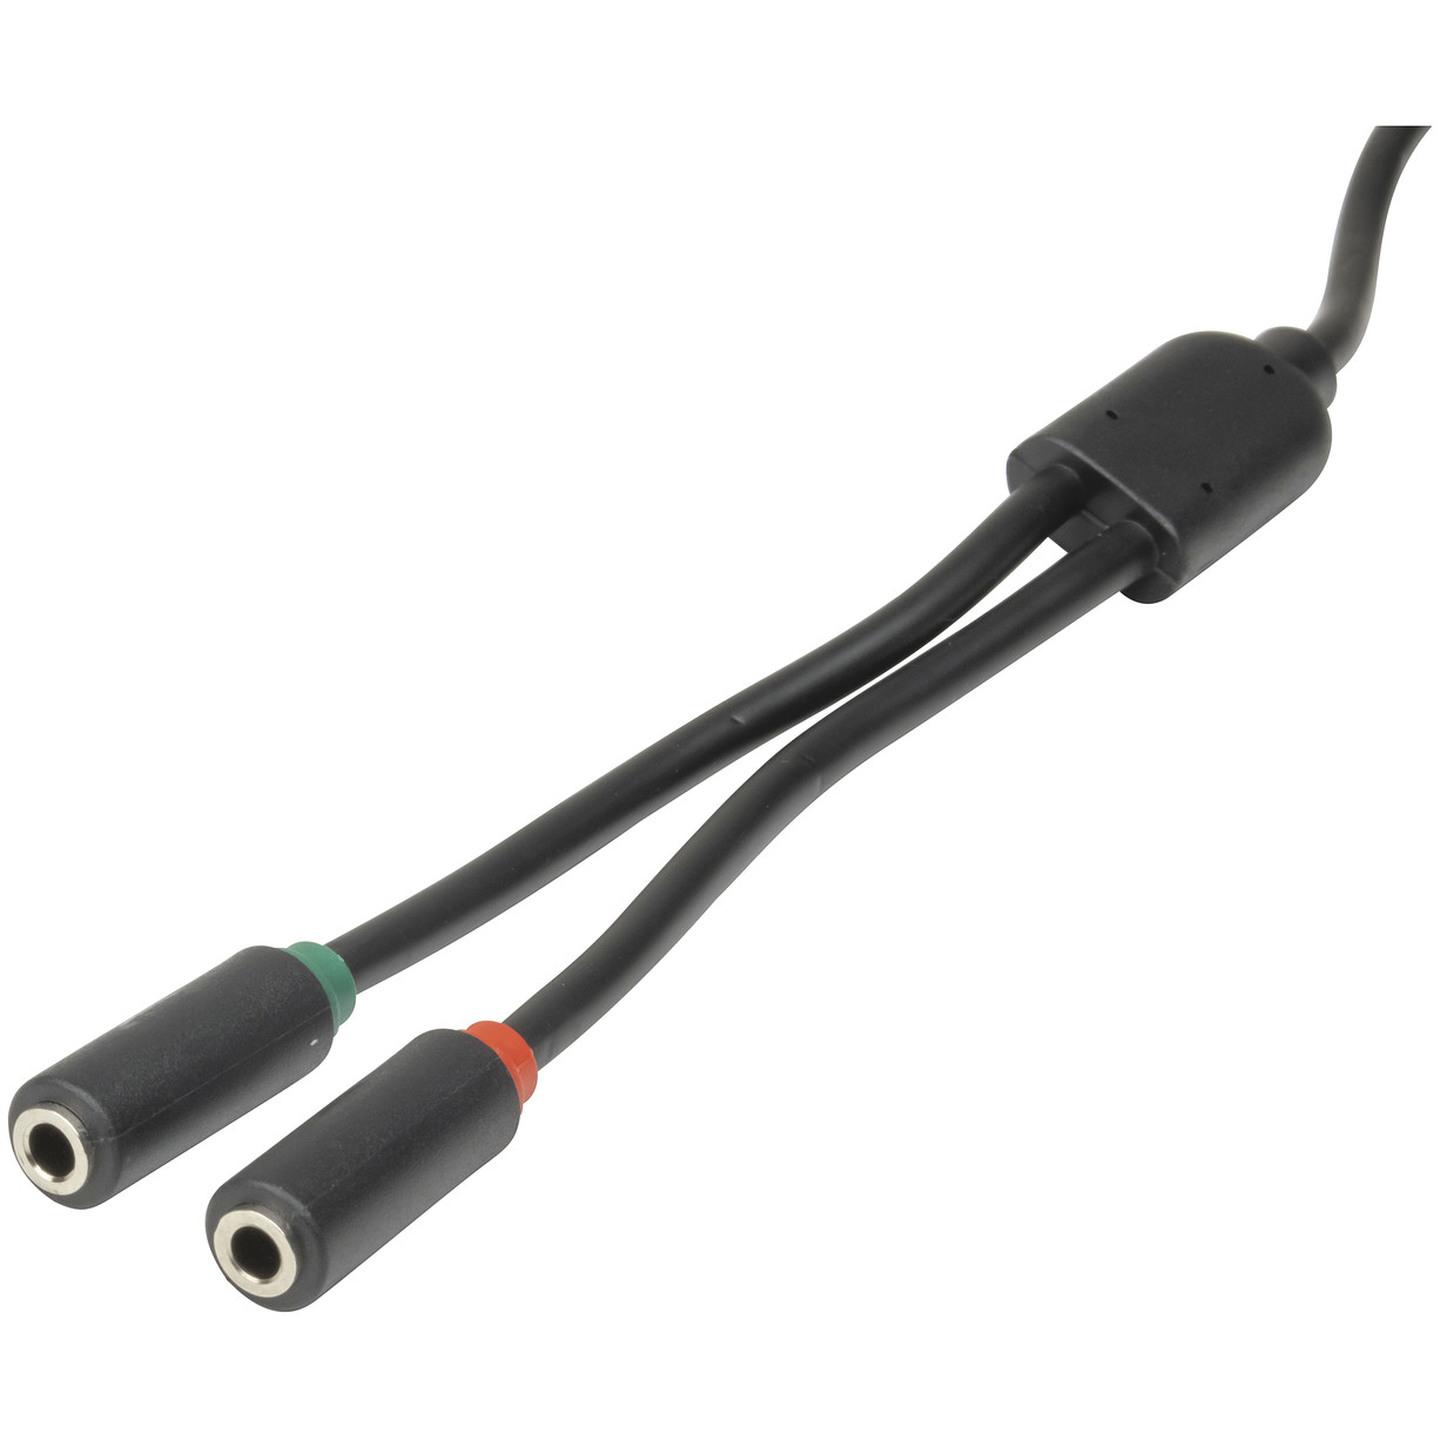 3.5mm 4 Pole Plug to 2 x 3.5mm Socket Cable - 250mm